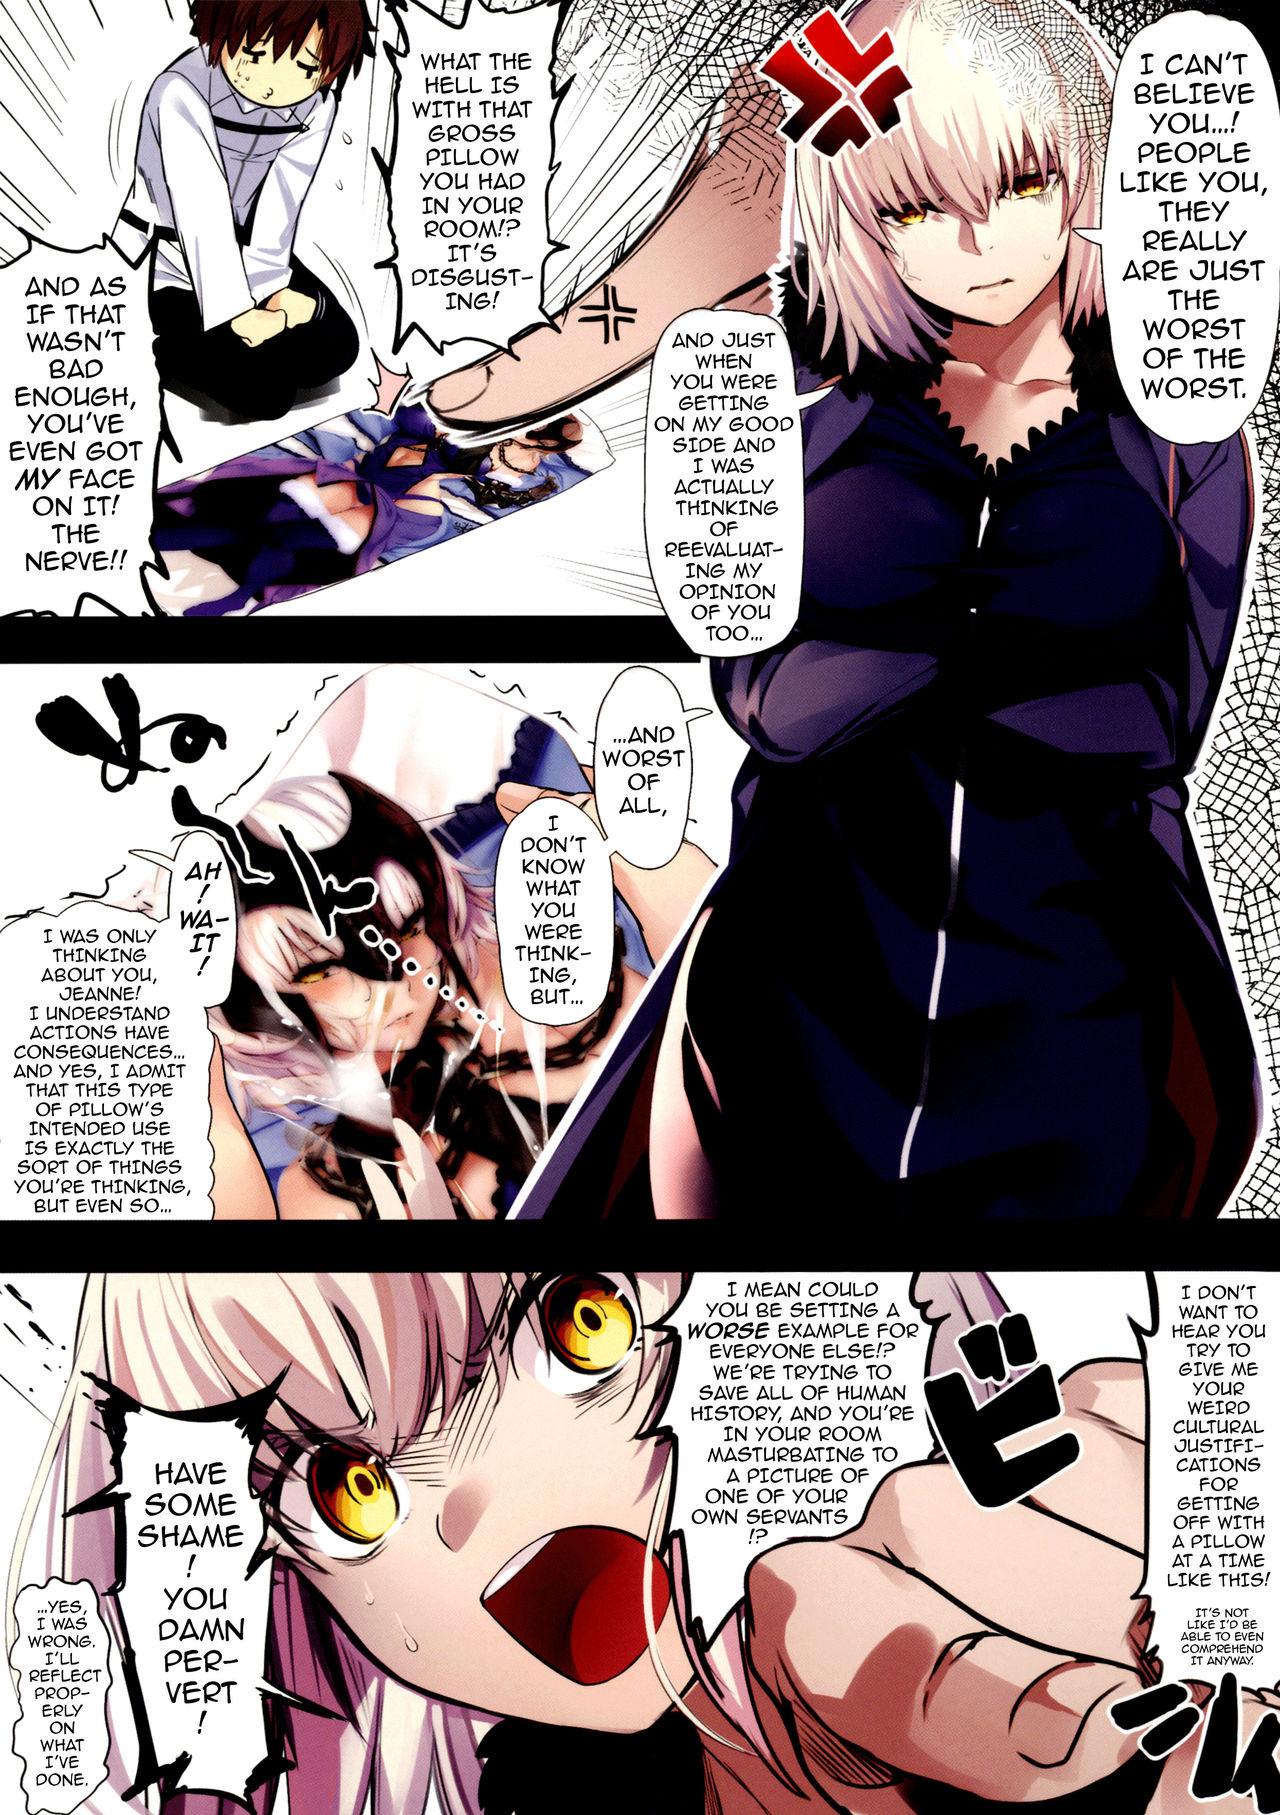 Best Blowjob Jeanne Alter ni Onegai Shitai? + Omake Shikishi | Did you ask Jeanne alter? + Bonus Color Page - Fate grand order Indoor - Page 2